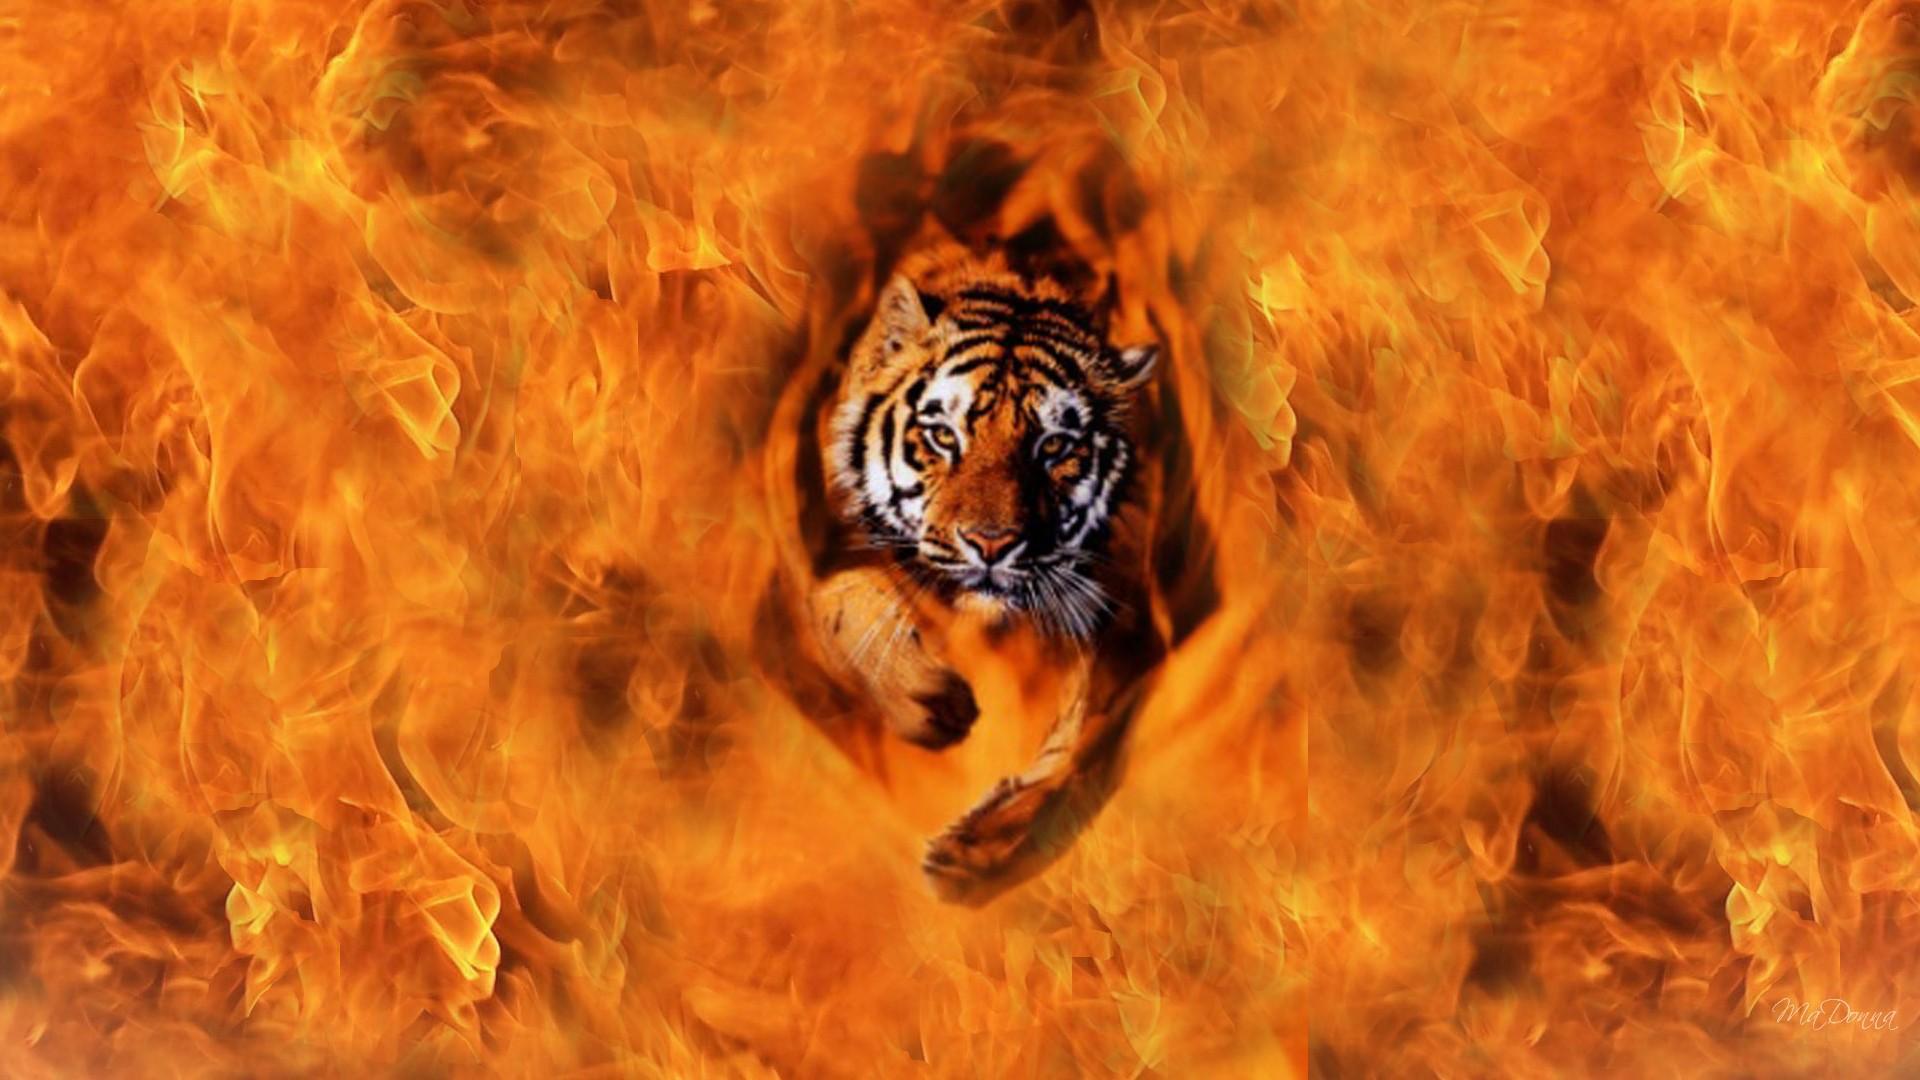 Tiger From The Flames Wallpaper 1920x1080 px Free Download